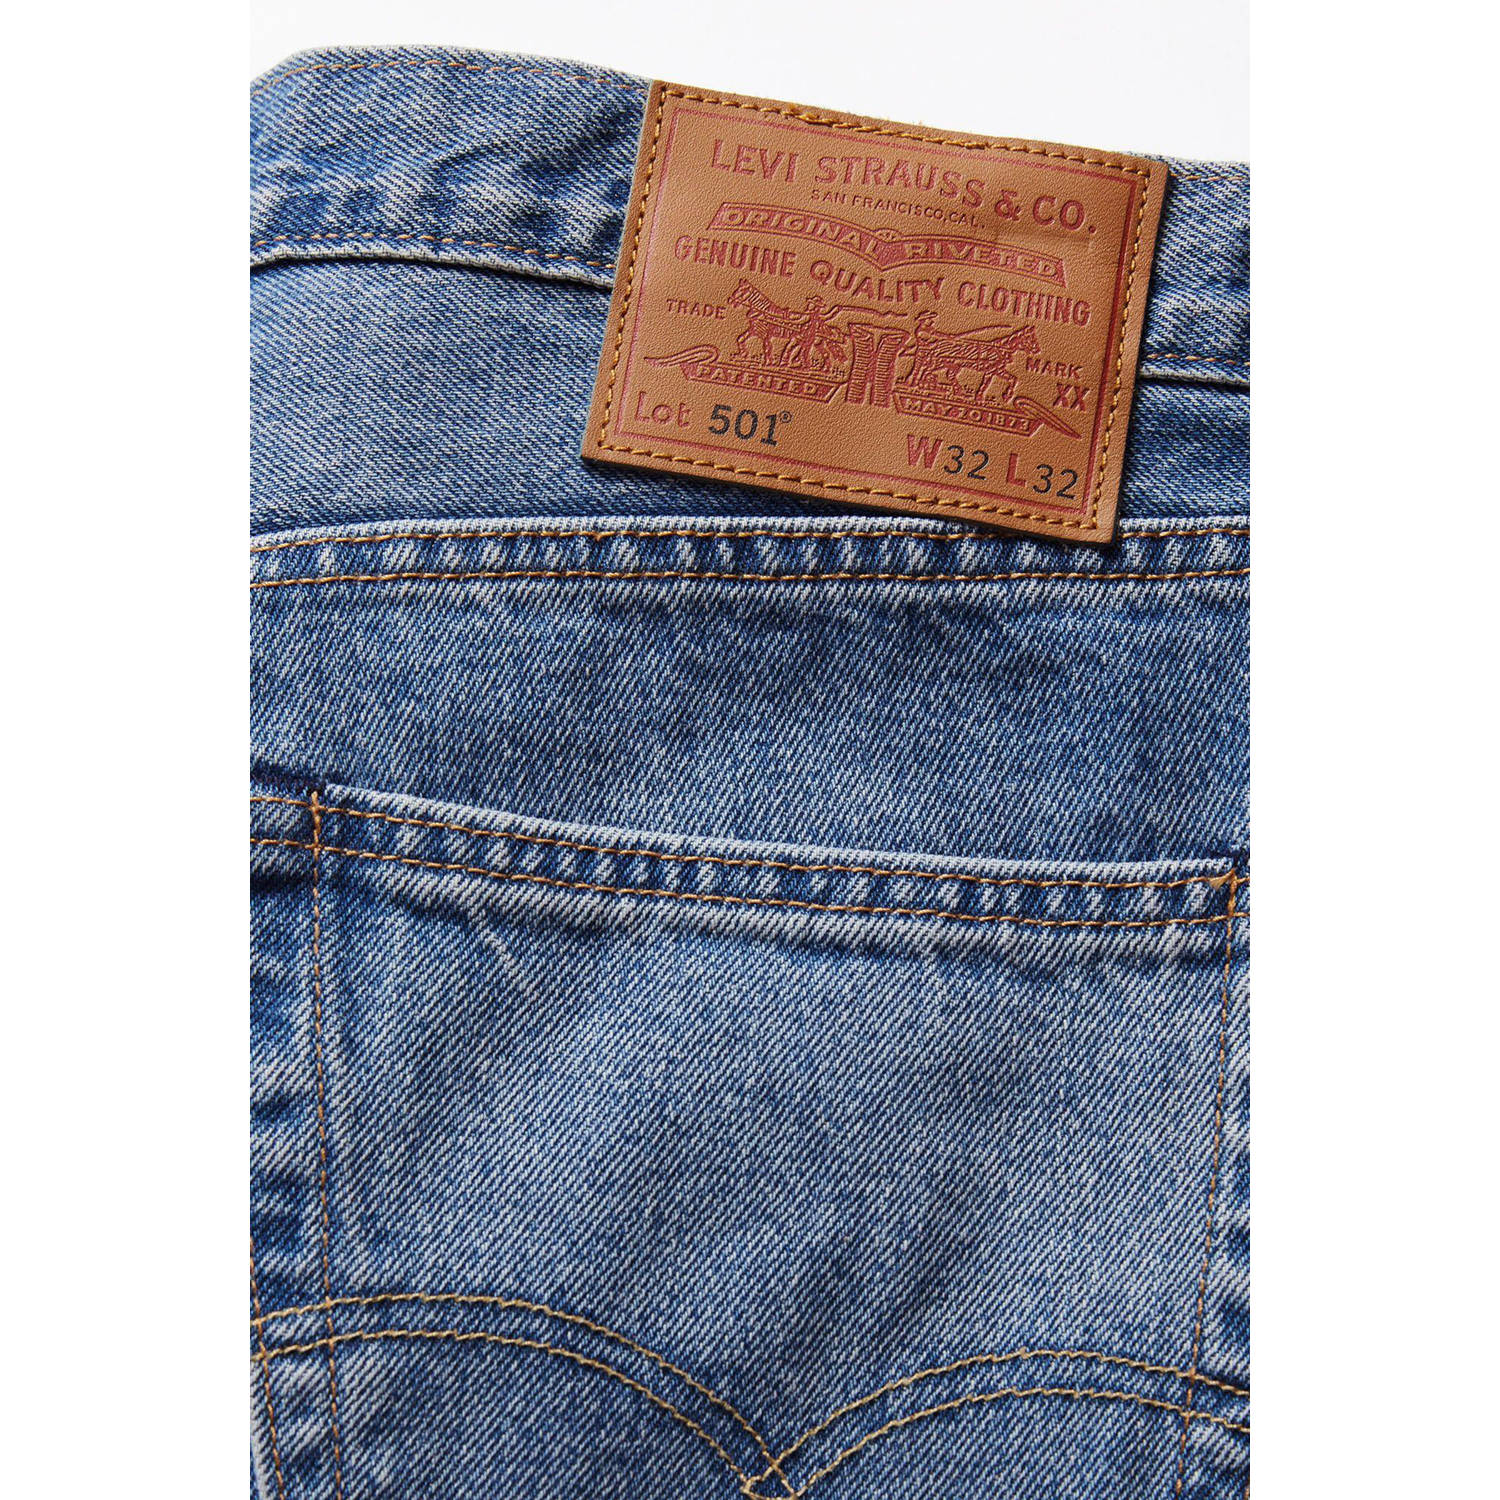 Levi's 501 straight fit jeans chemicals